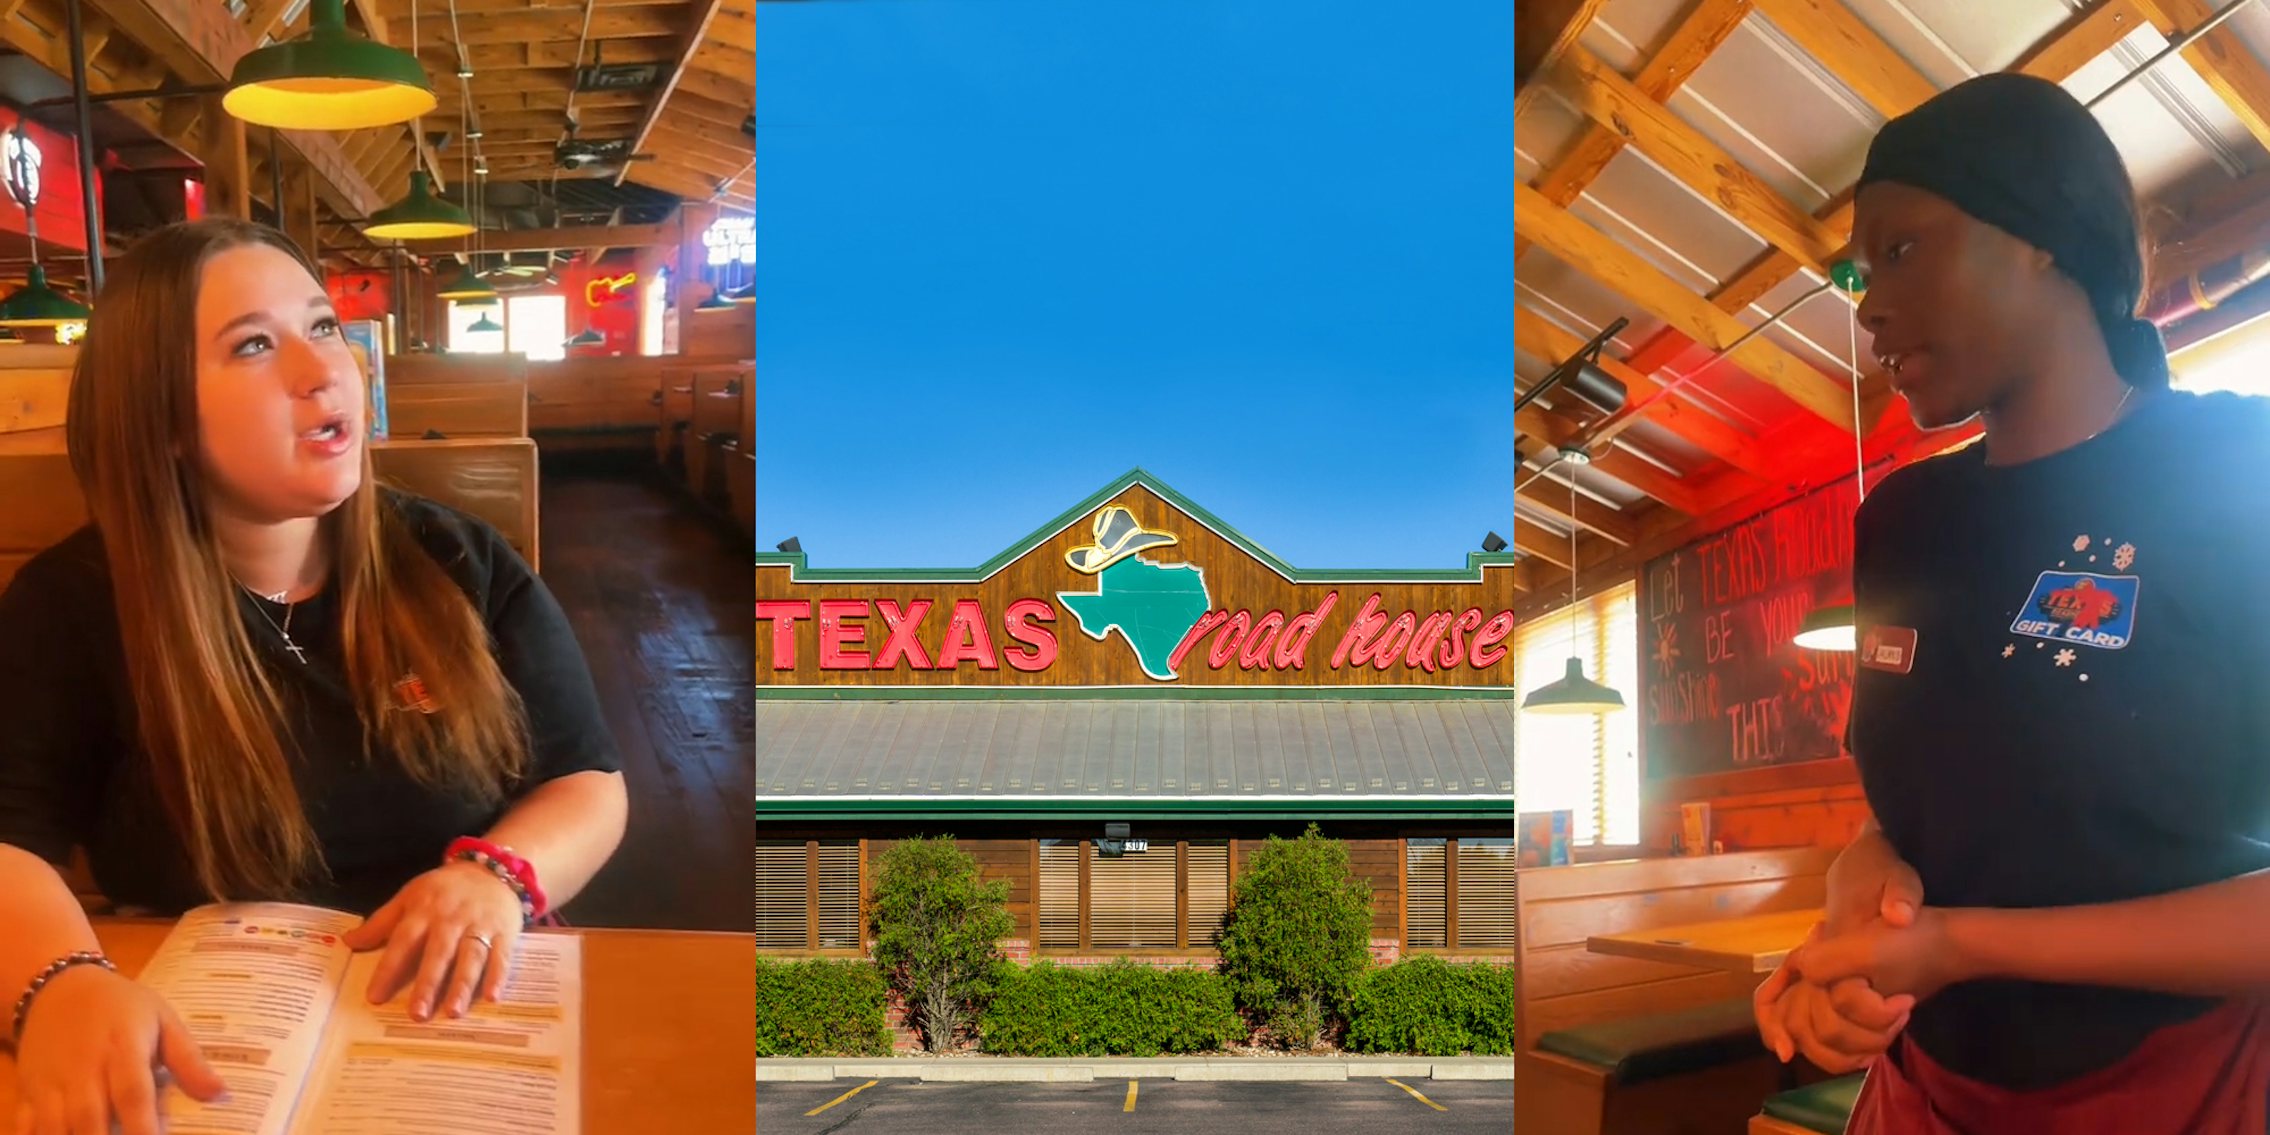 Texas Roadhouse server sitting at booth (l) Texas Roadhouse building with sign and blue sky (c) Texas Roadhouse server speaking (r)